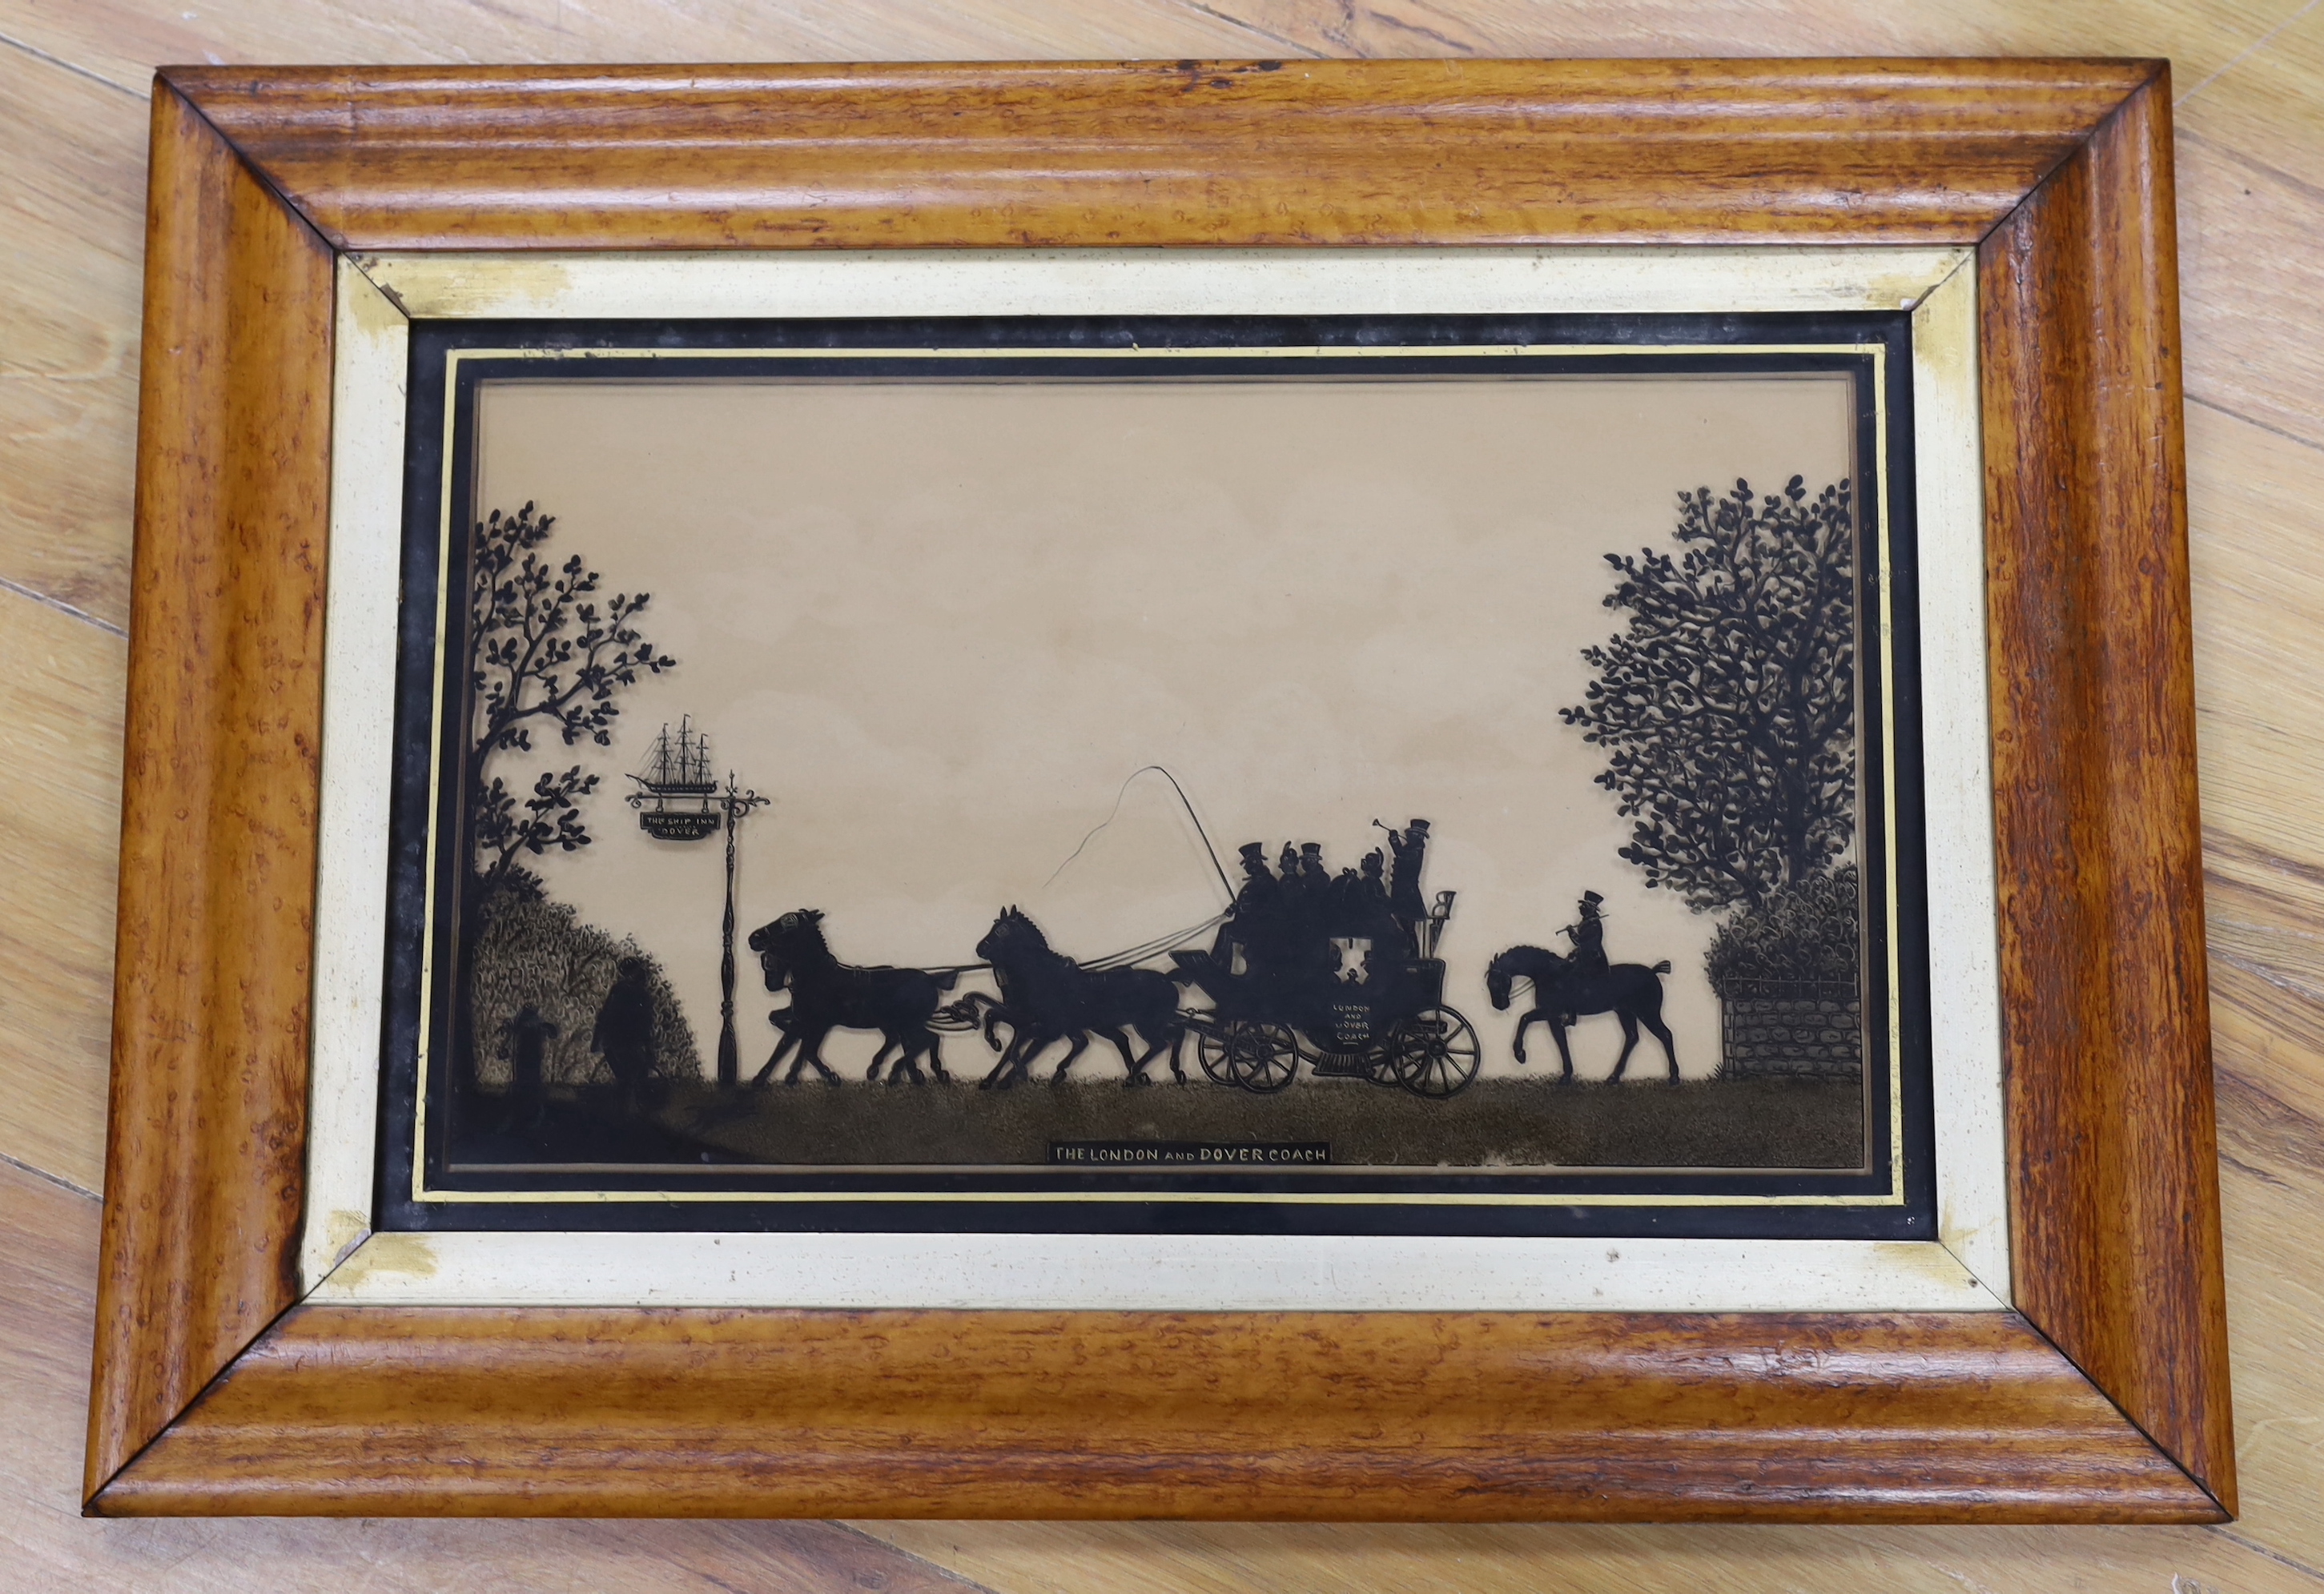 19th century English School, 'The London and Dover Coach', a silhouette study, 28 x 46cm